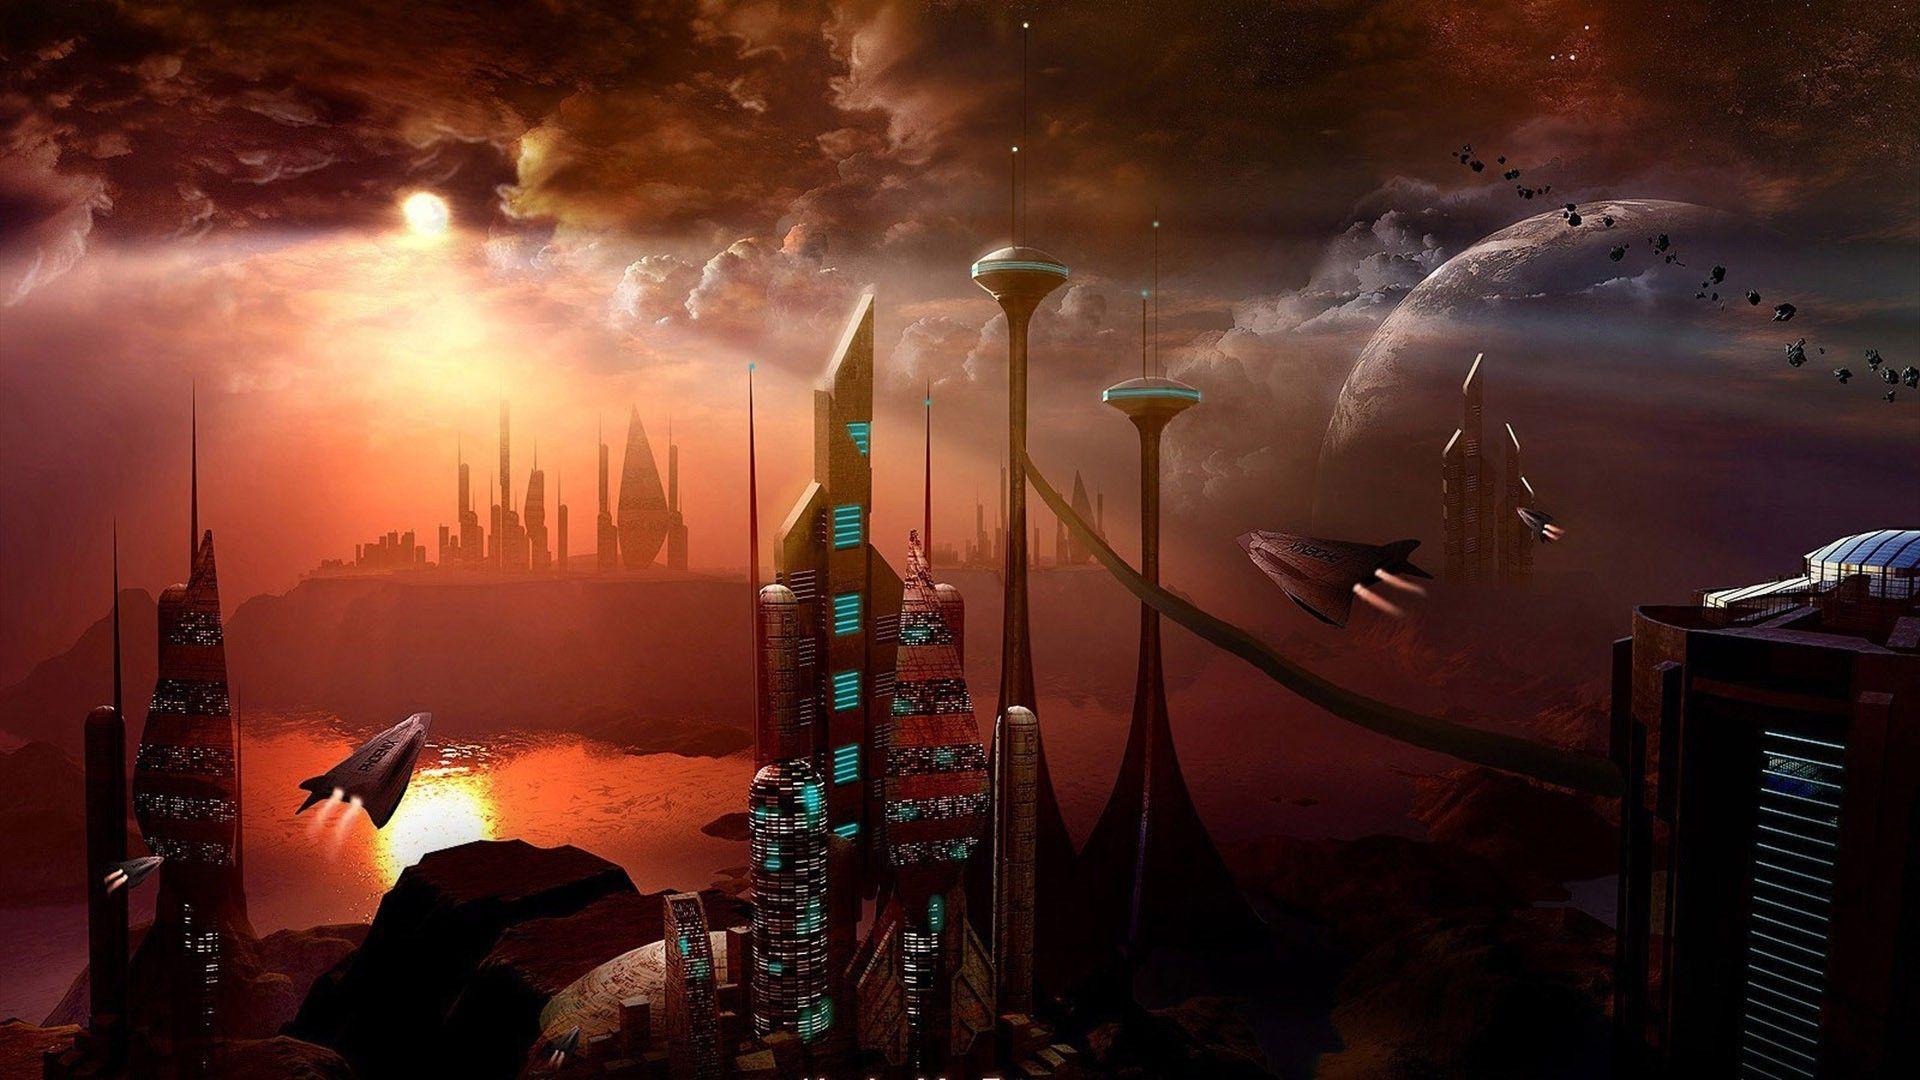 digital Art, Fantasy Art, Painting, City, Cityscape, Futuristic, Science Fiction, Building, Tower, Sun, Planet, Clouds, Meteors, Spaceship, Flying, Sunlight Wallpaper HD / Desktop and Mobile Background